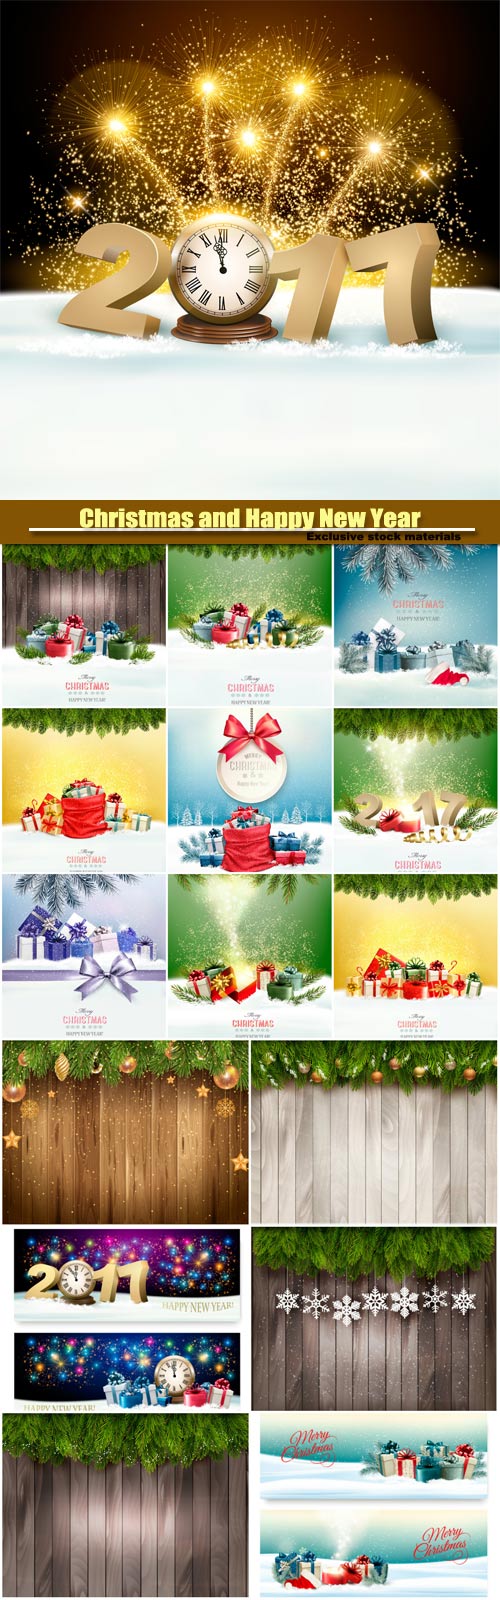 Christmas and Happy New Year background with 2017, presents with a gift card, clock and fireworks